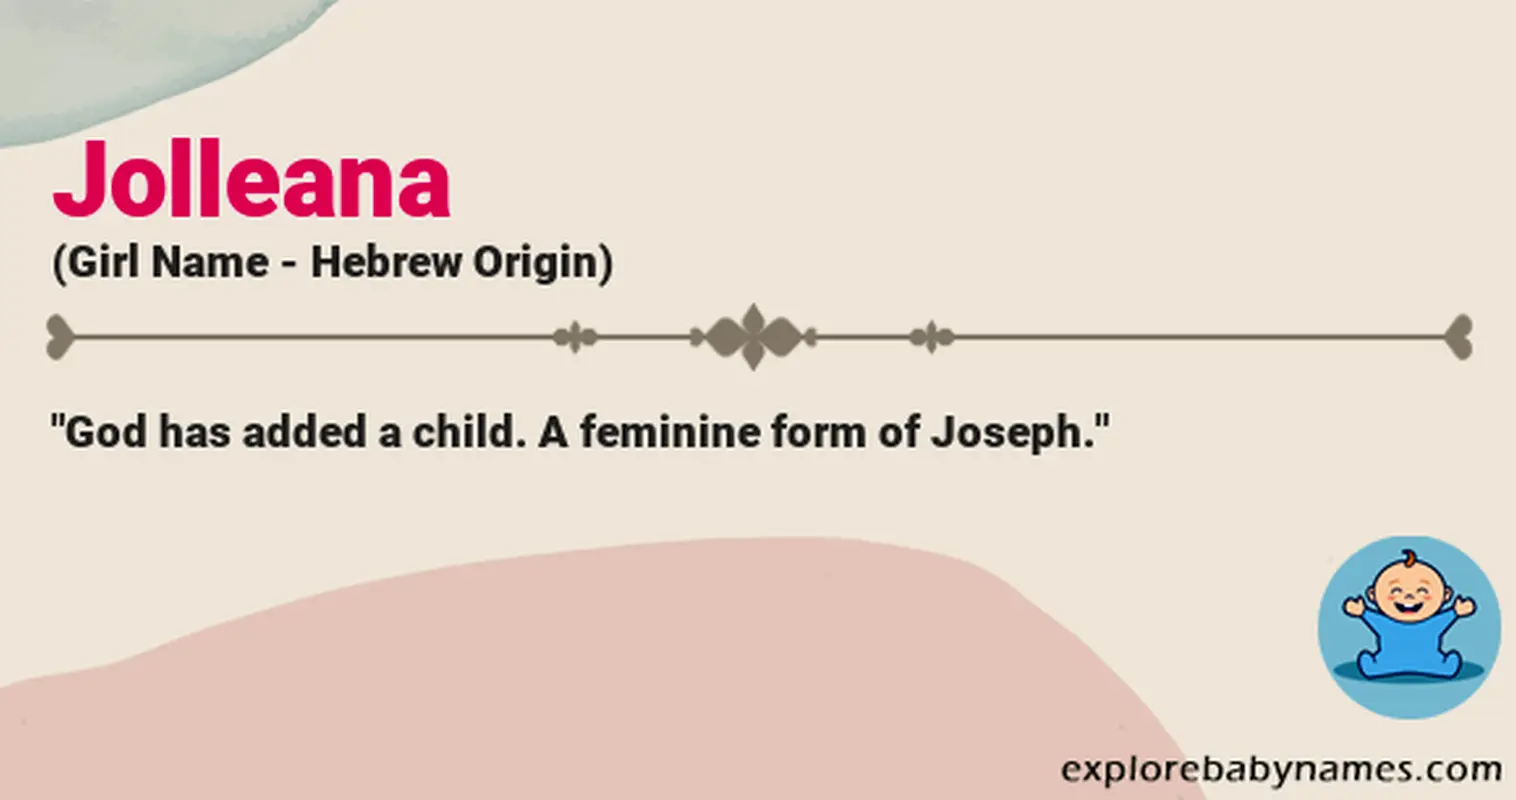 Meaning of Jolleana